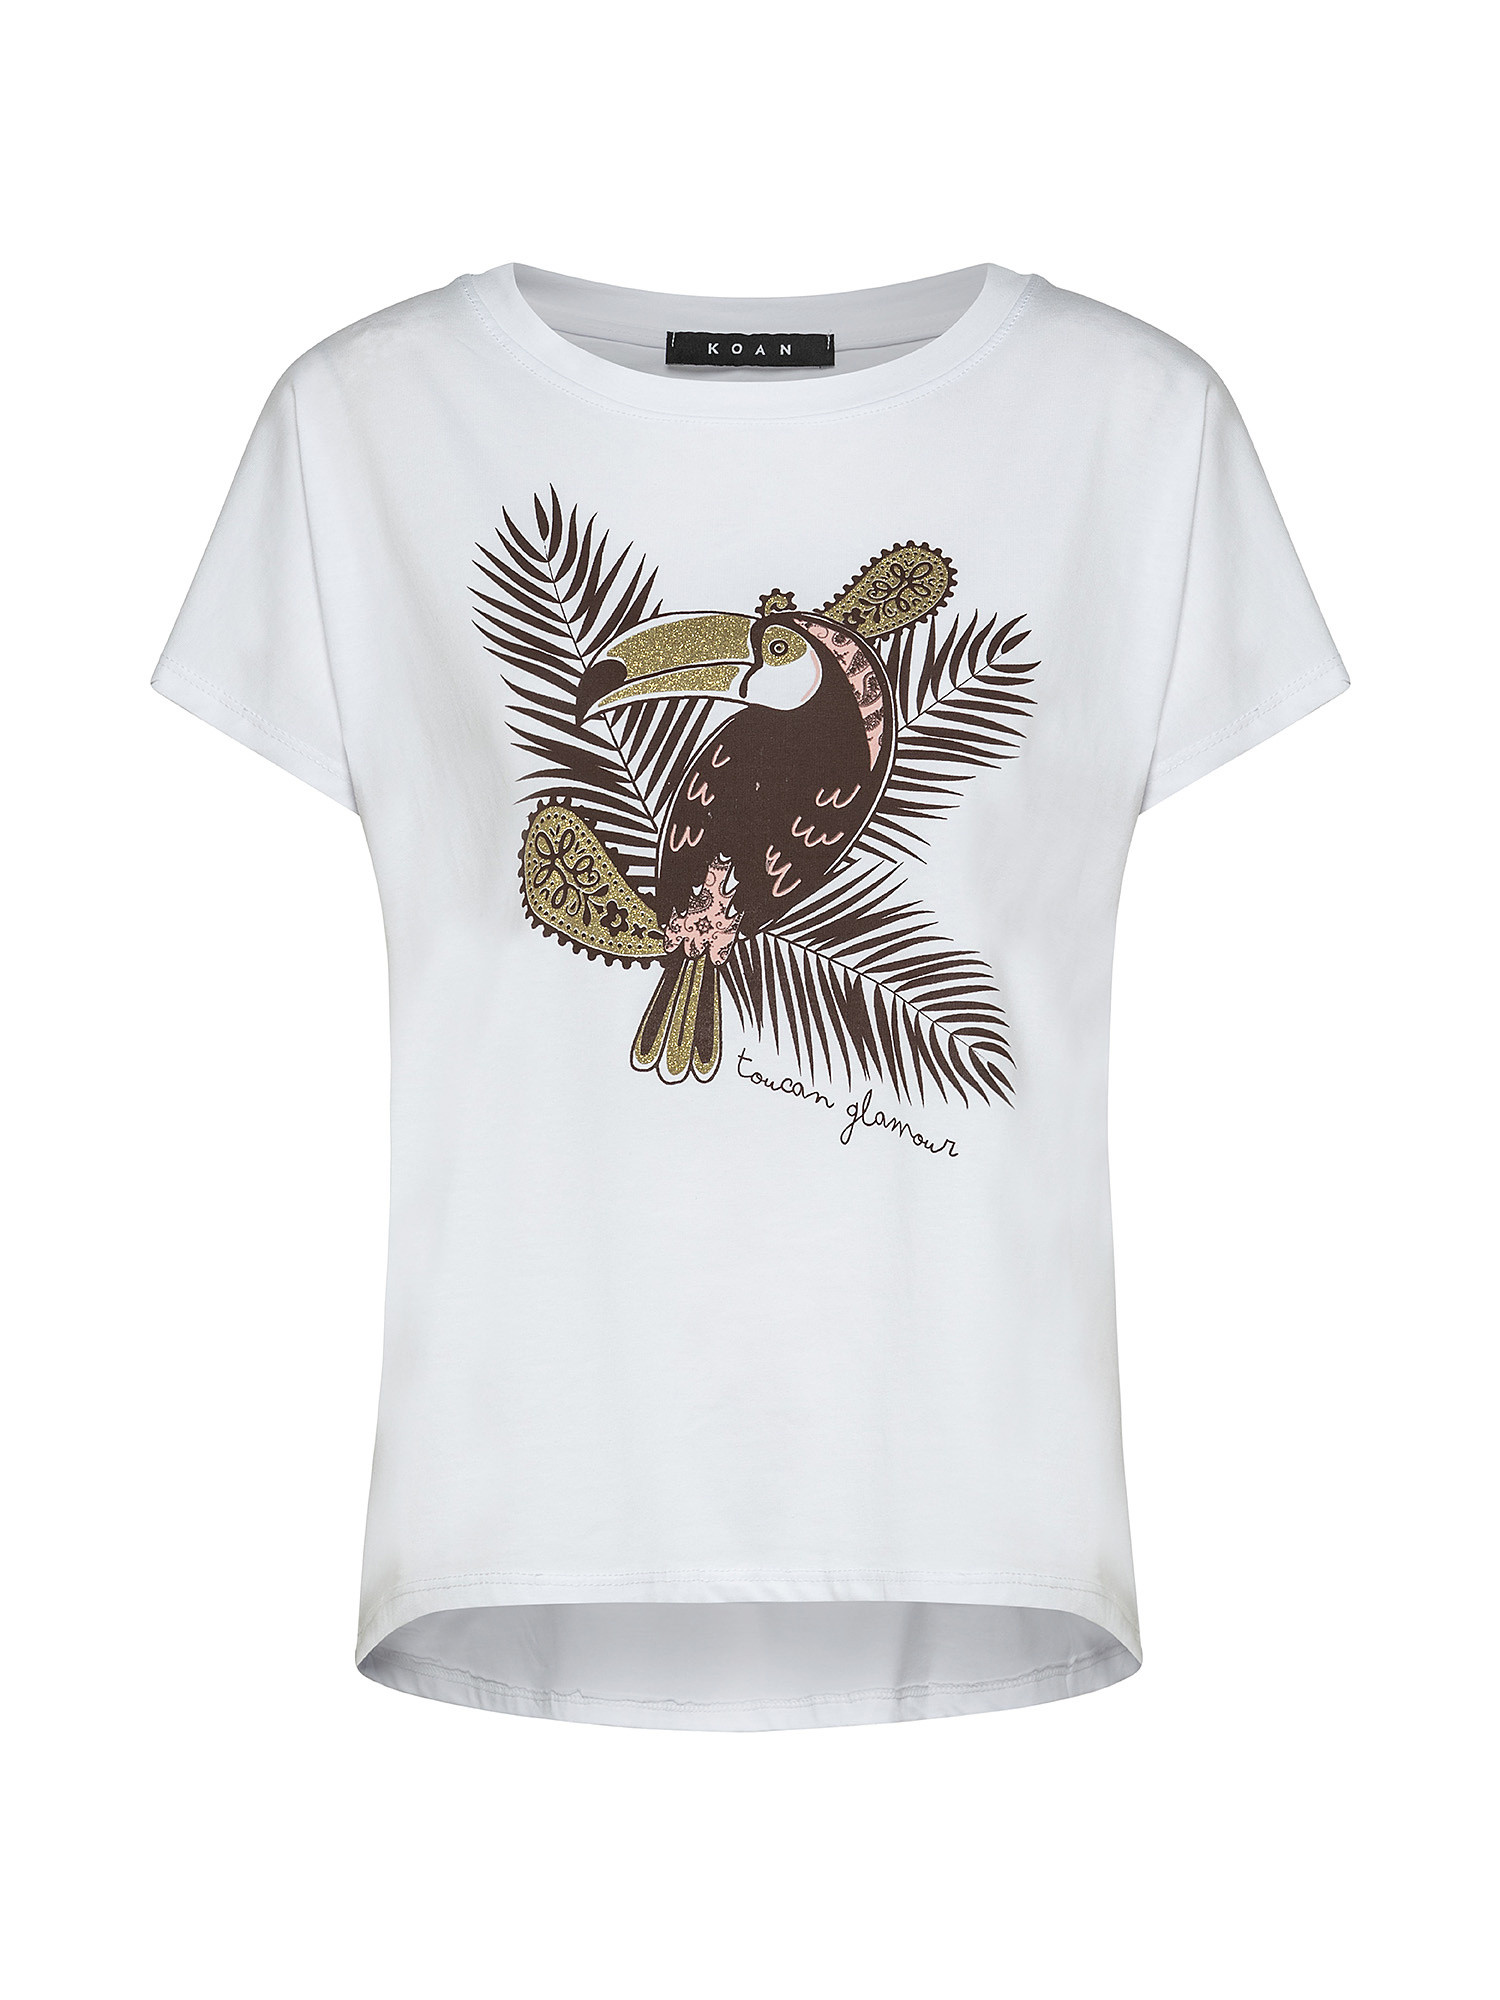 T-shirt con stampa tucano, Bianco, large image number 0